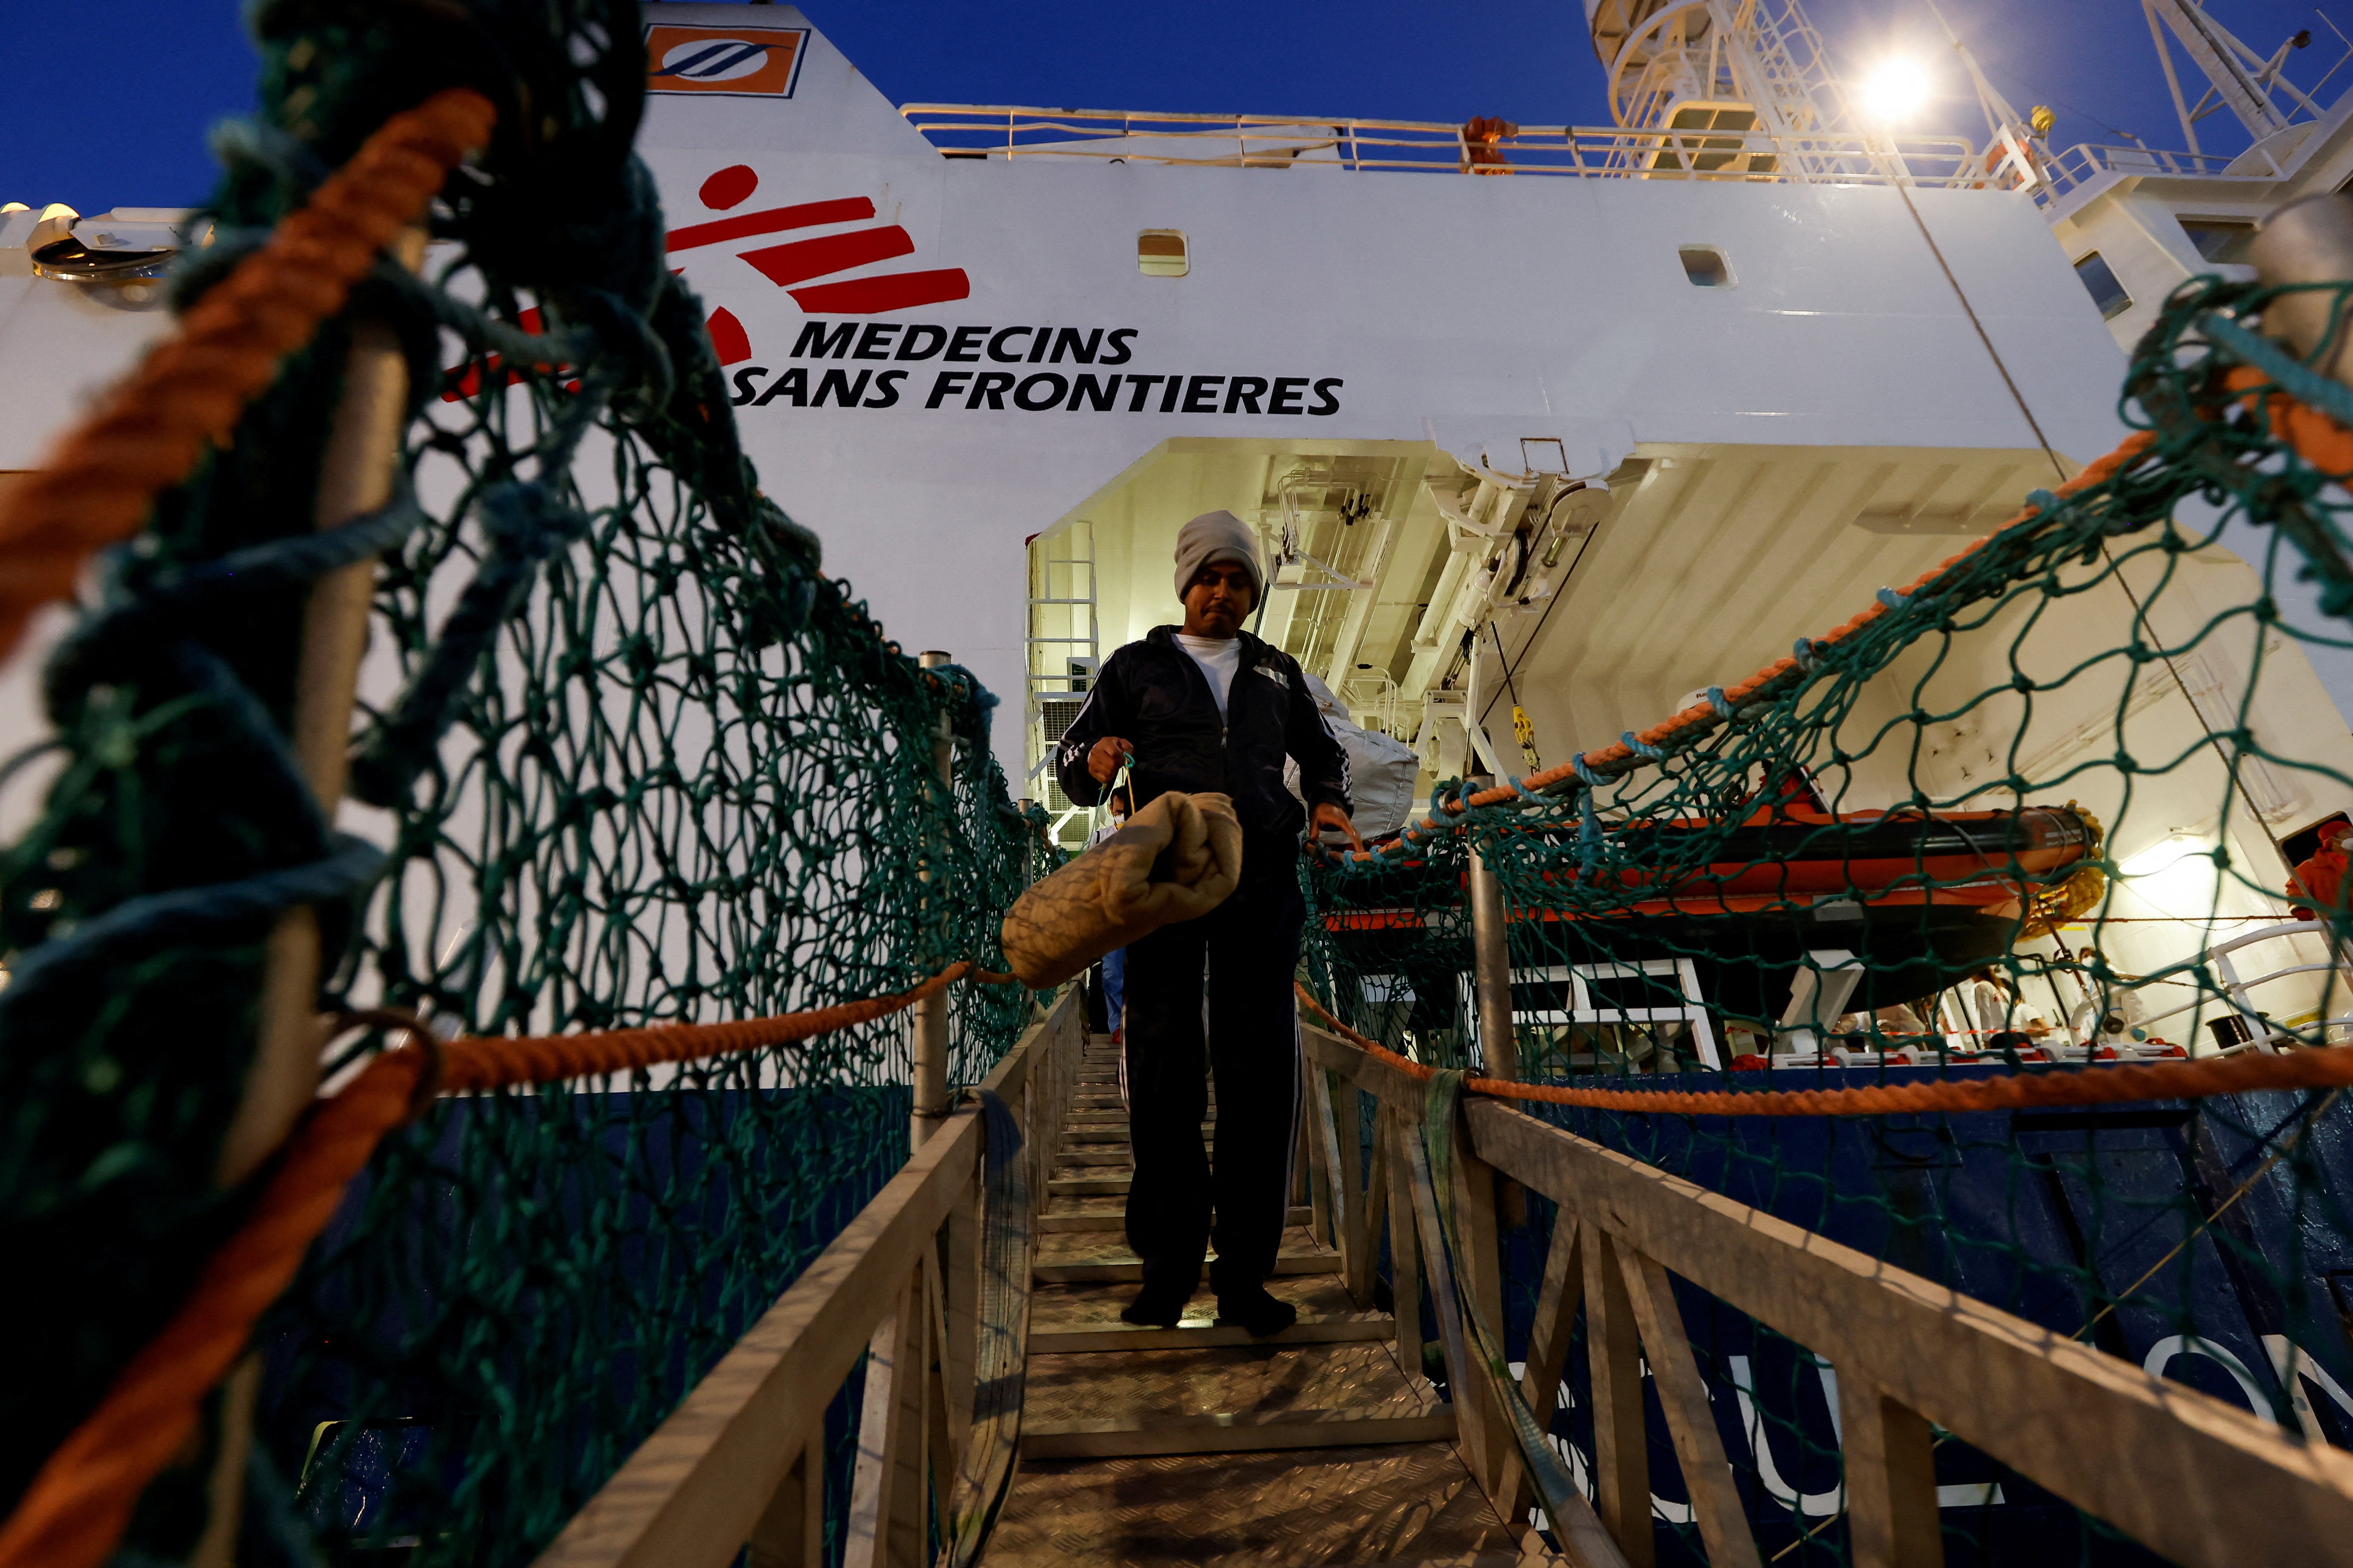 A migrant disembarks the Geo Barents rescue ship, operated by Medecins Sans Frontieres (Doctors Without Borders), in Bari, Italy March 26, 2023. Photo: Reuters